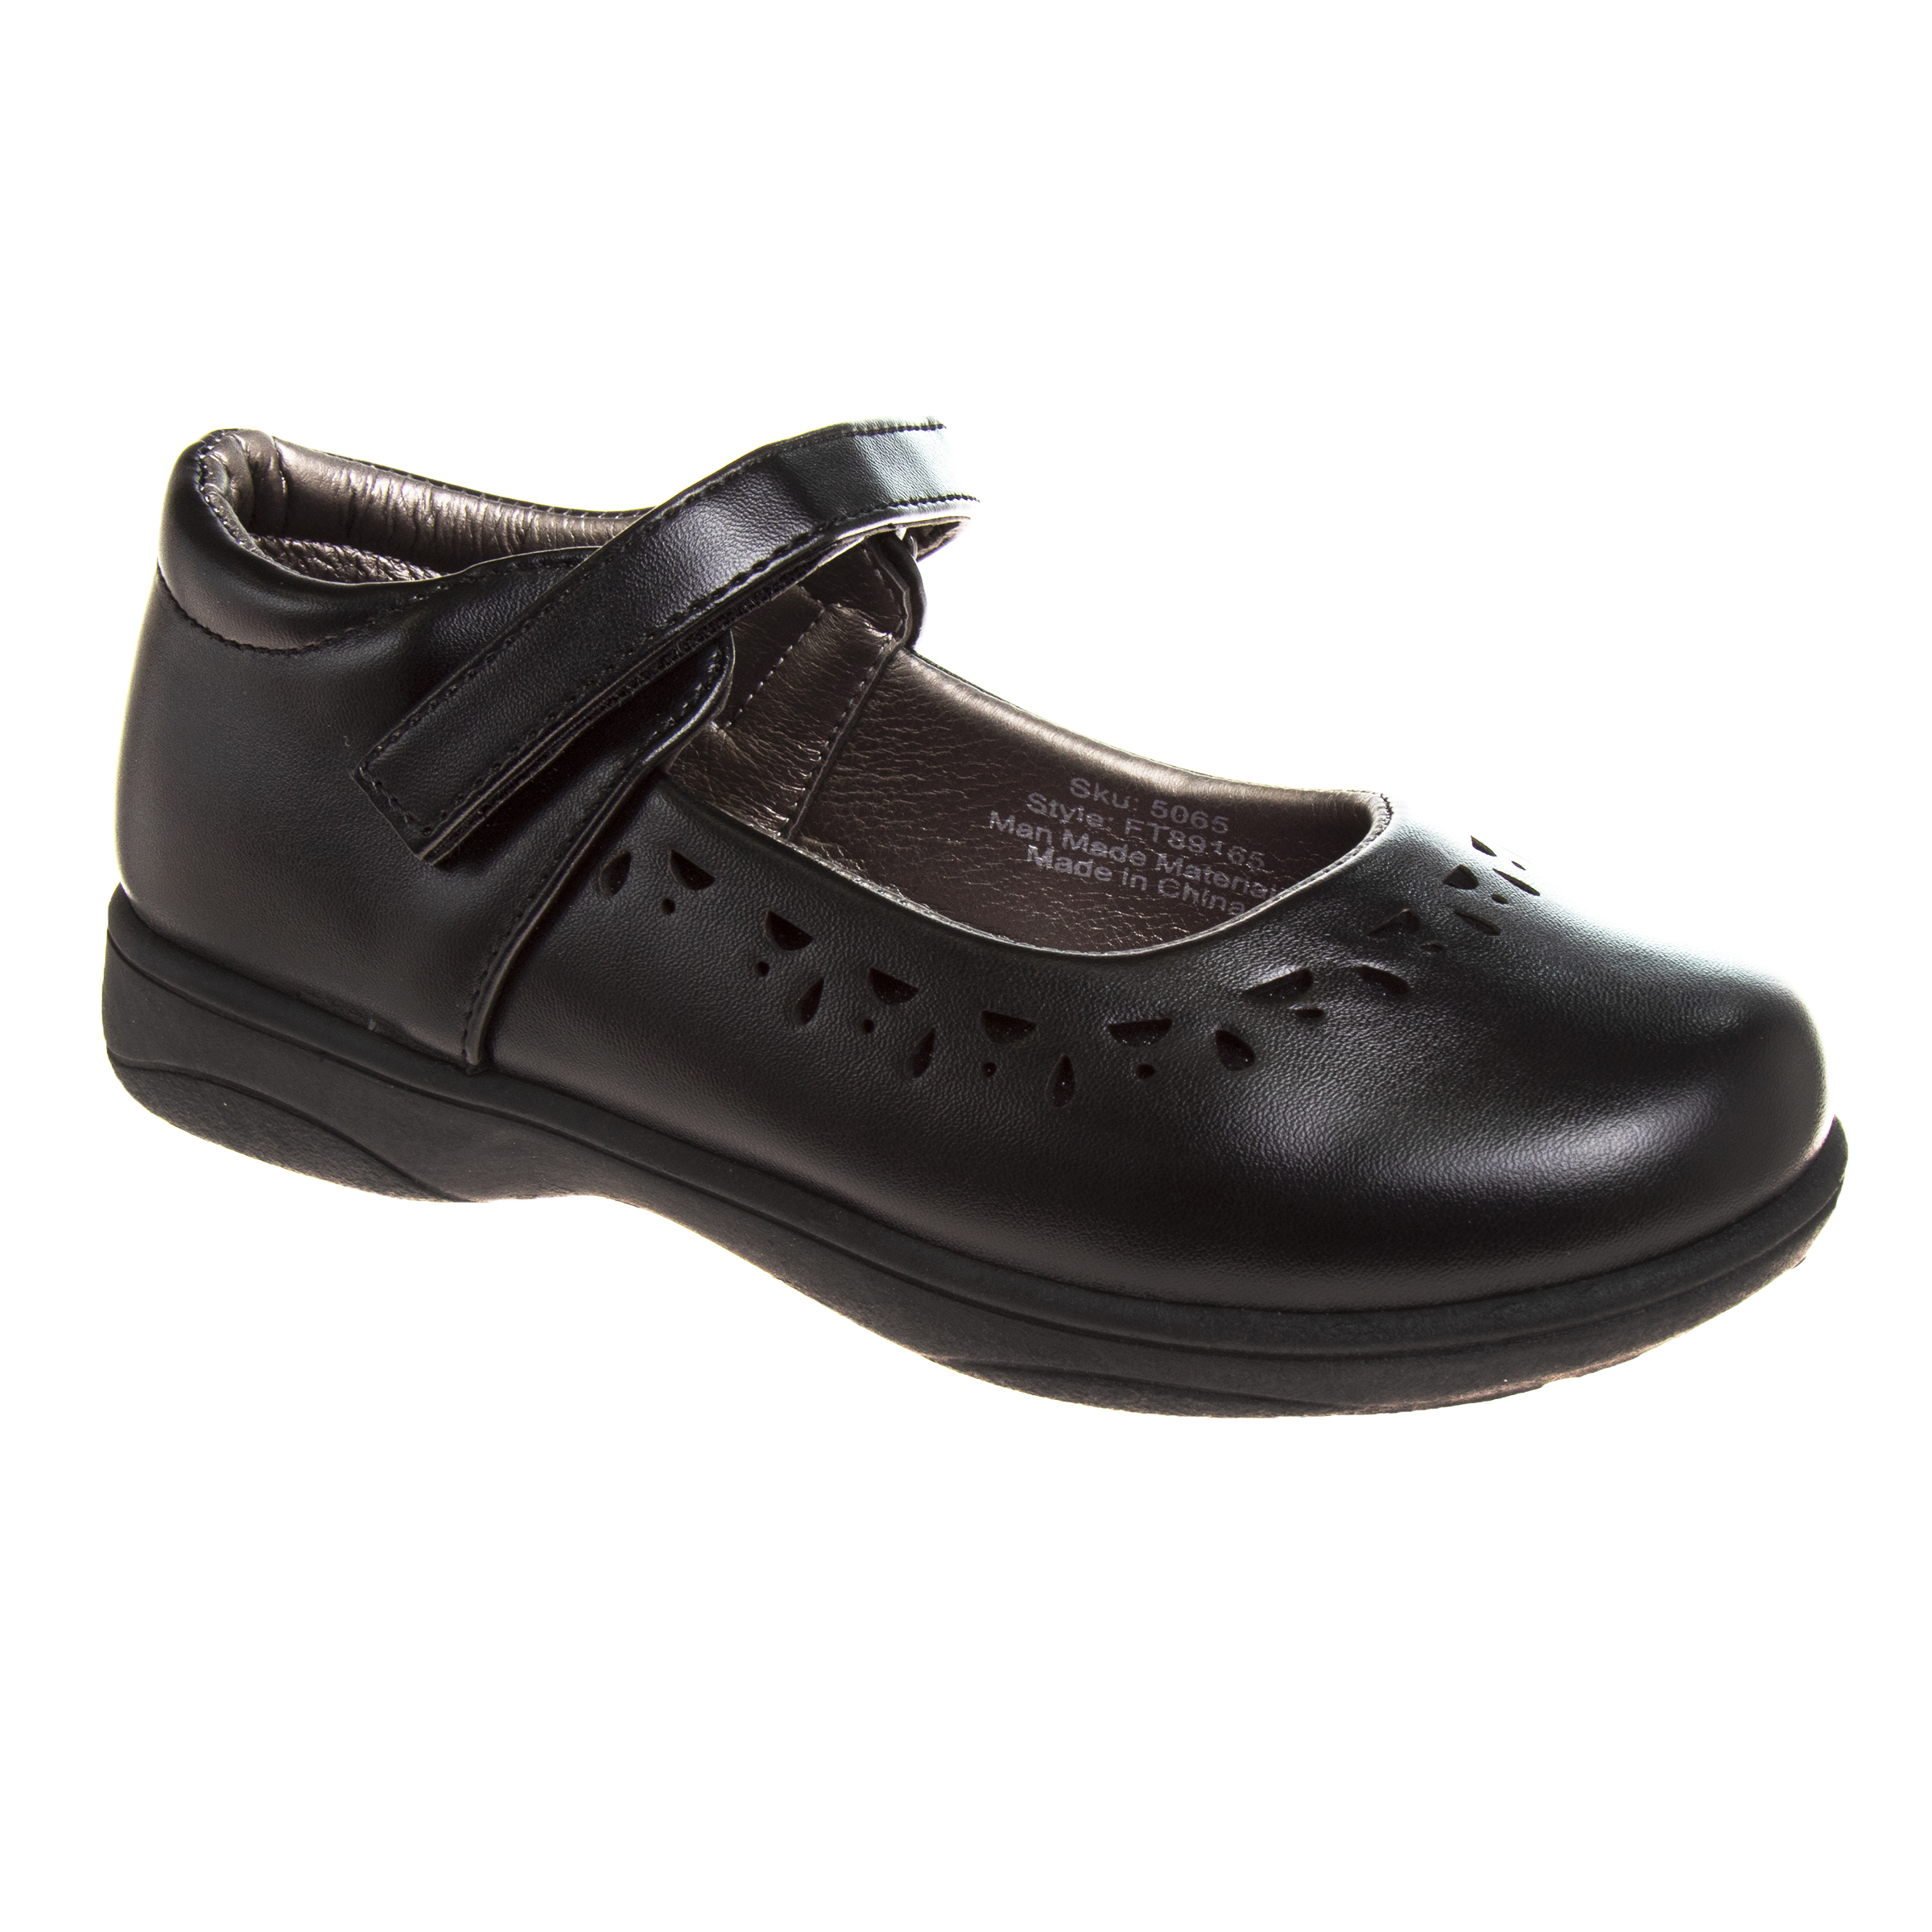 French Toast Youth Girls School Shoes, Sizes 9-4 - image 1 of 6